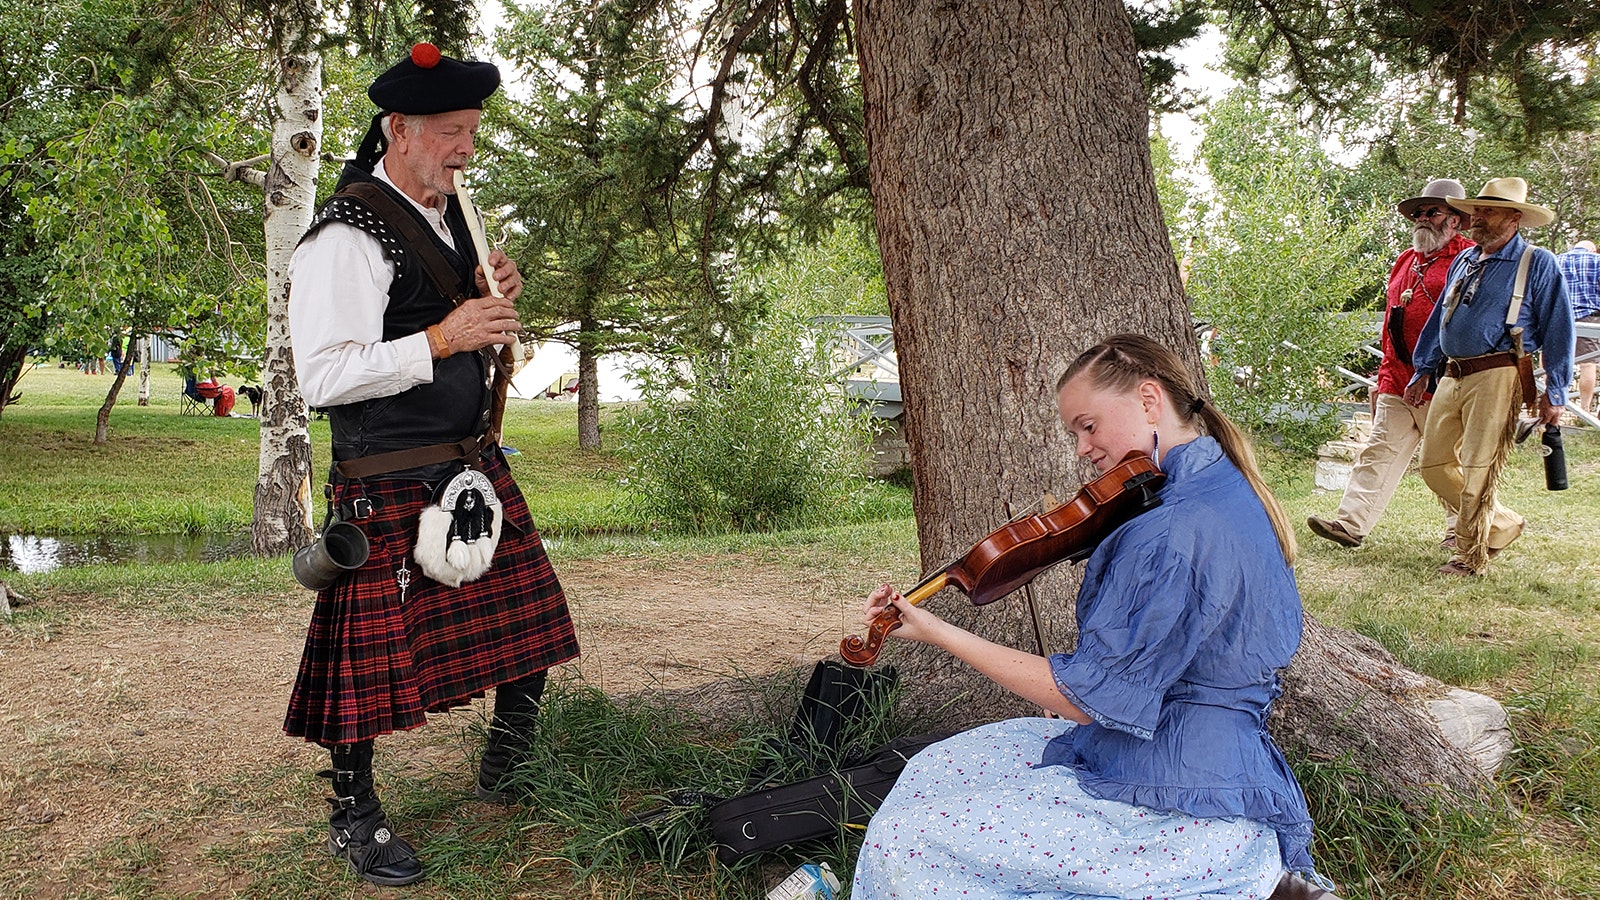 In a mashup of cultures, a Scottish tin whistle of old is played with a fiddle.